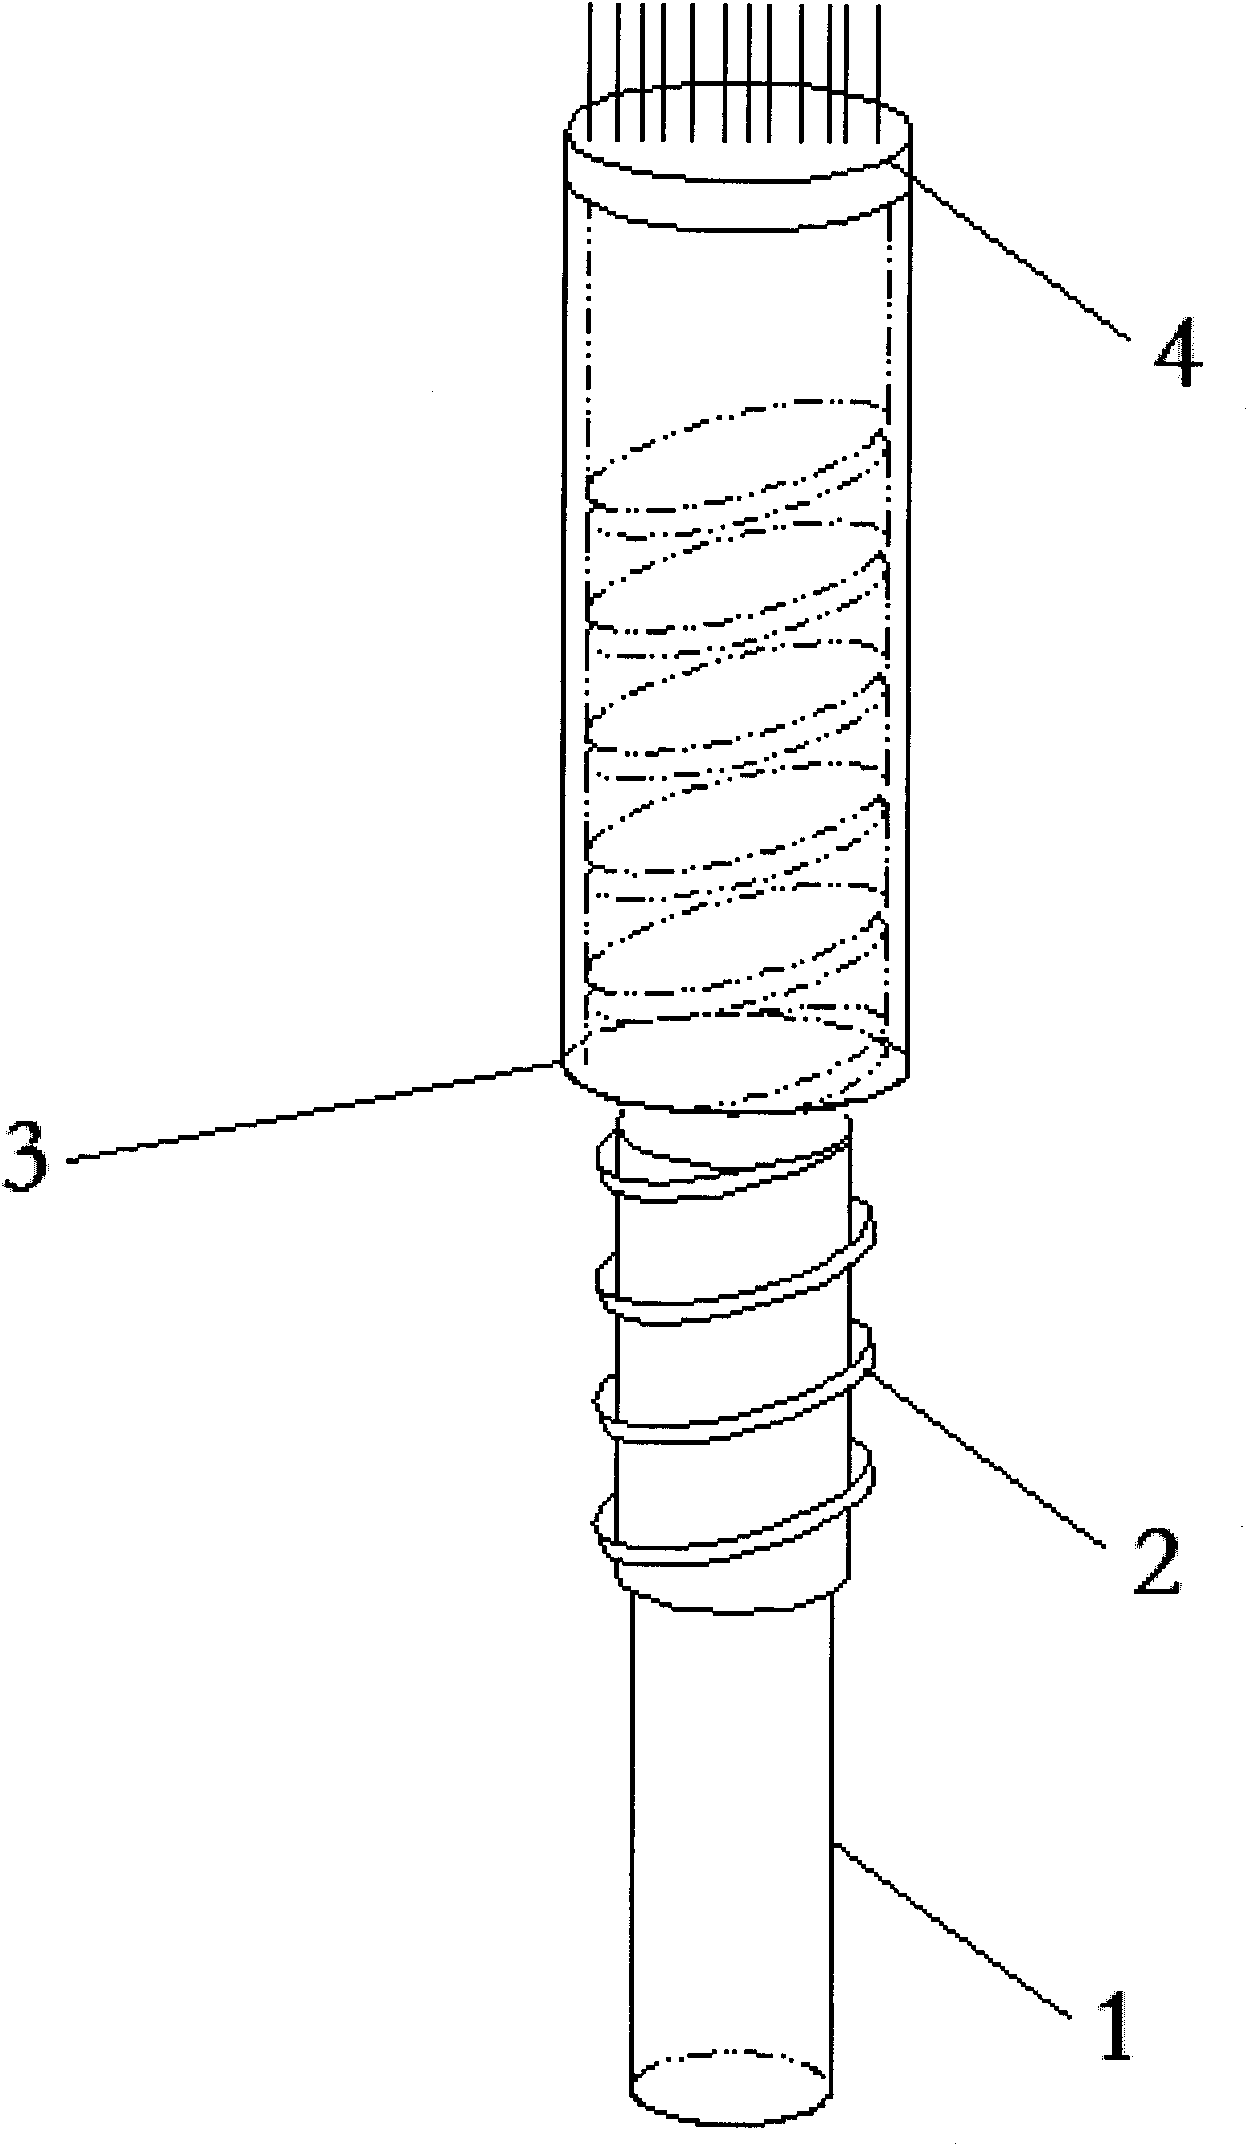 Manufacture method for chalk with telescopic holding handle